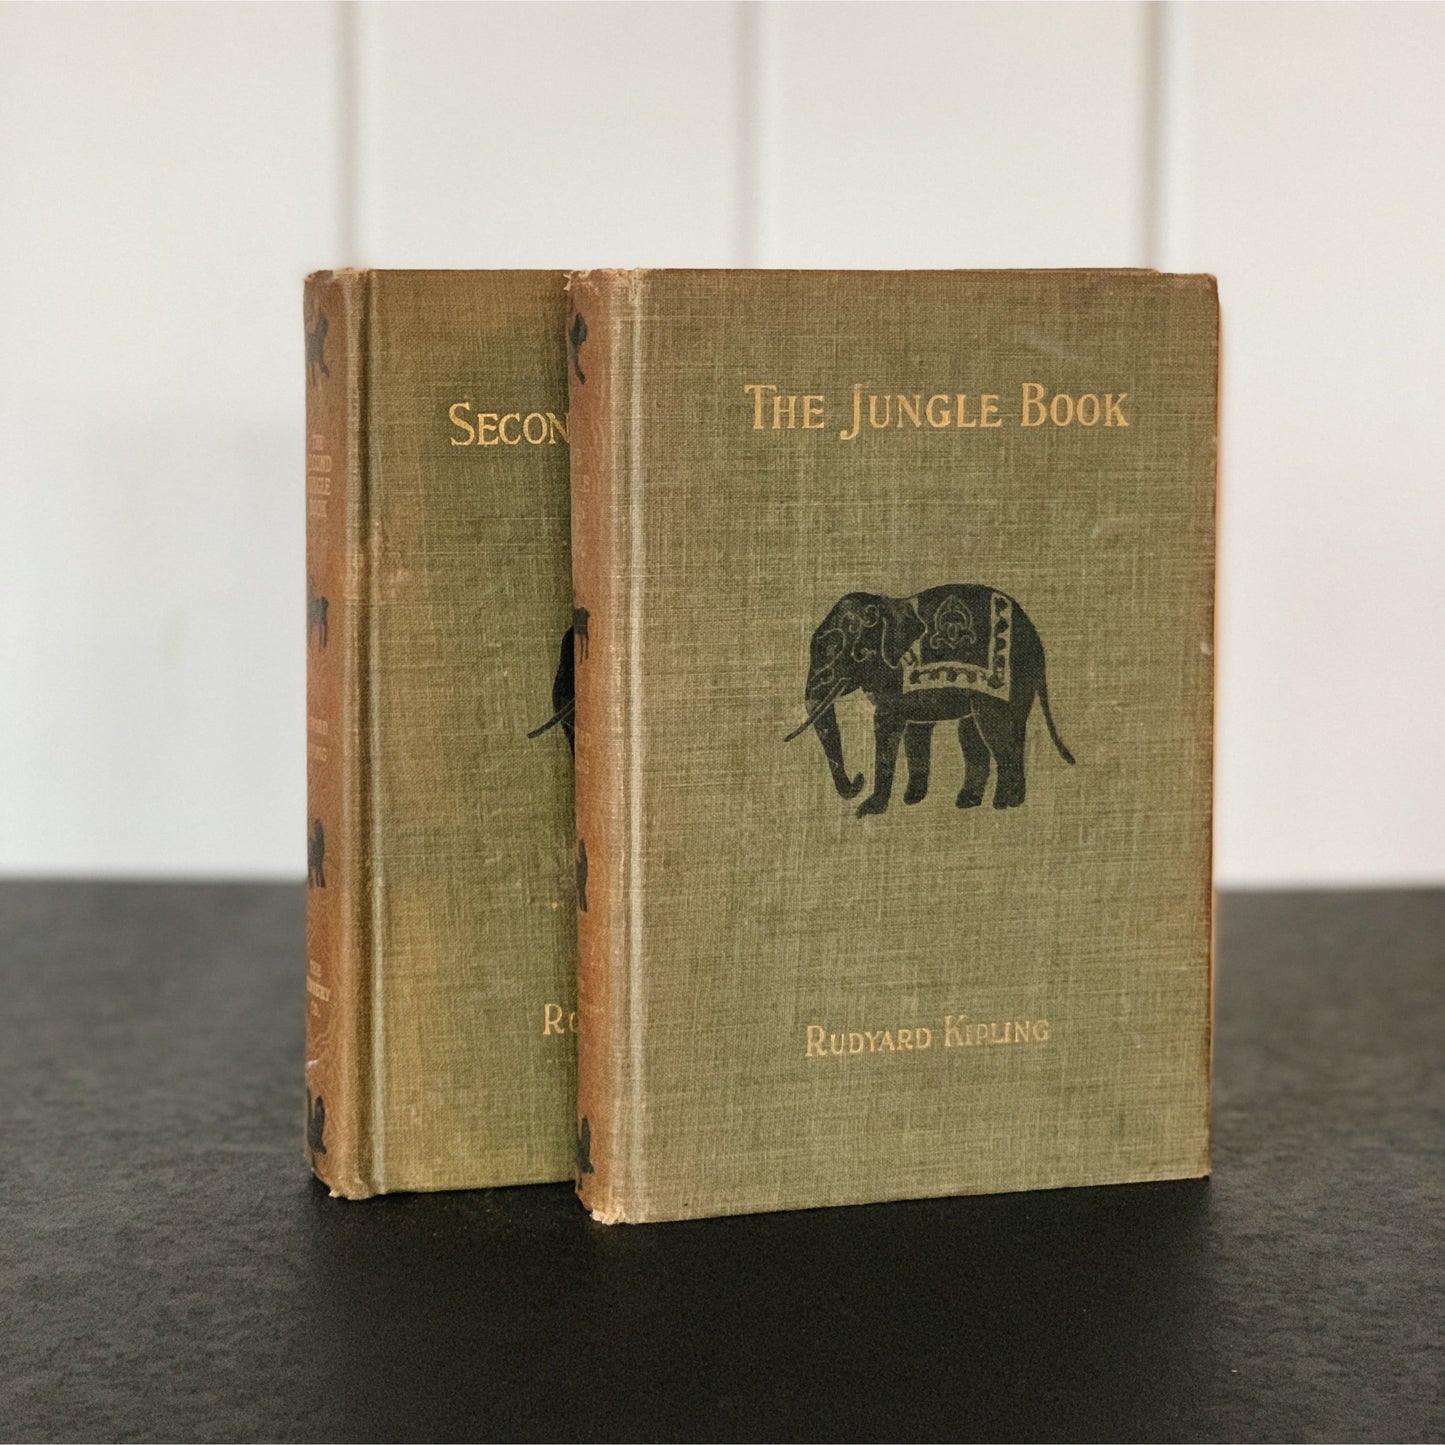 The Jungle Book and The Second Jungle Book, 1912-1913